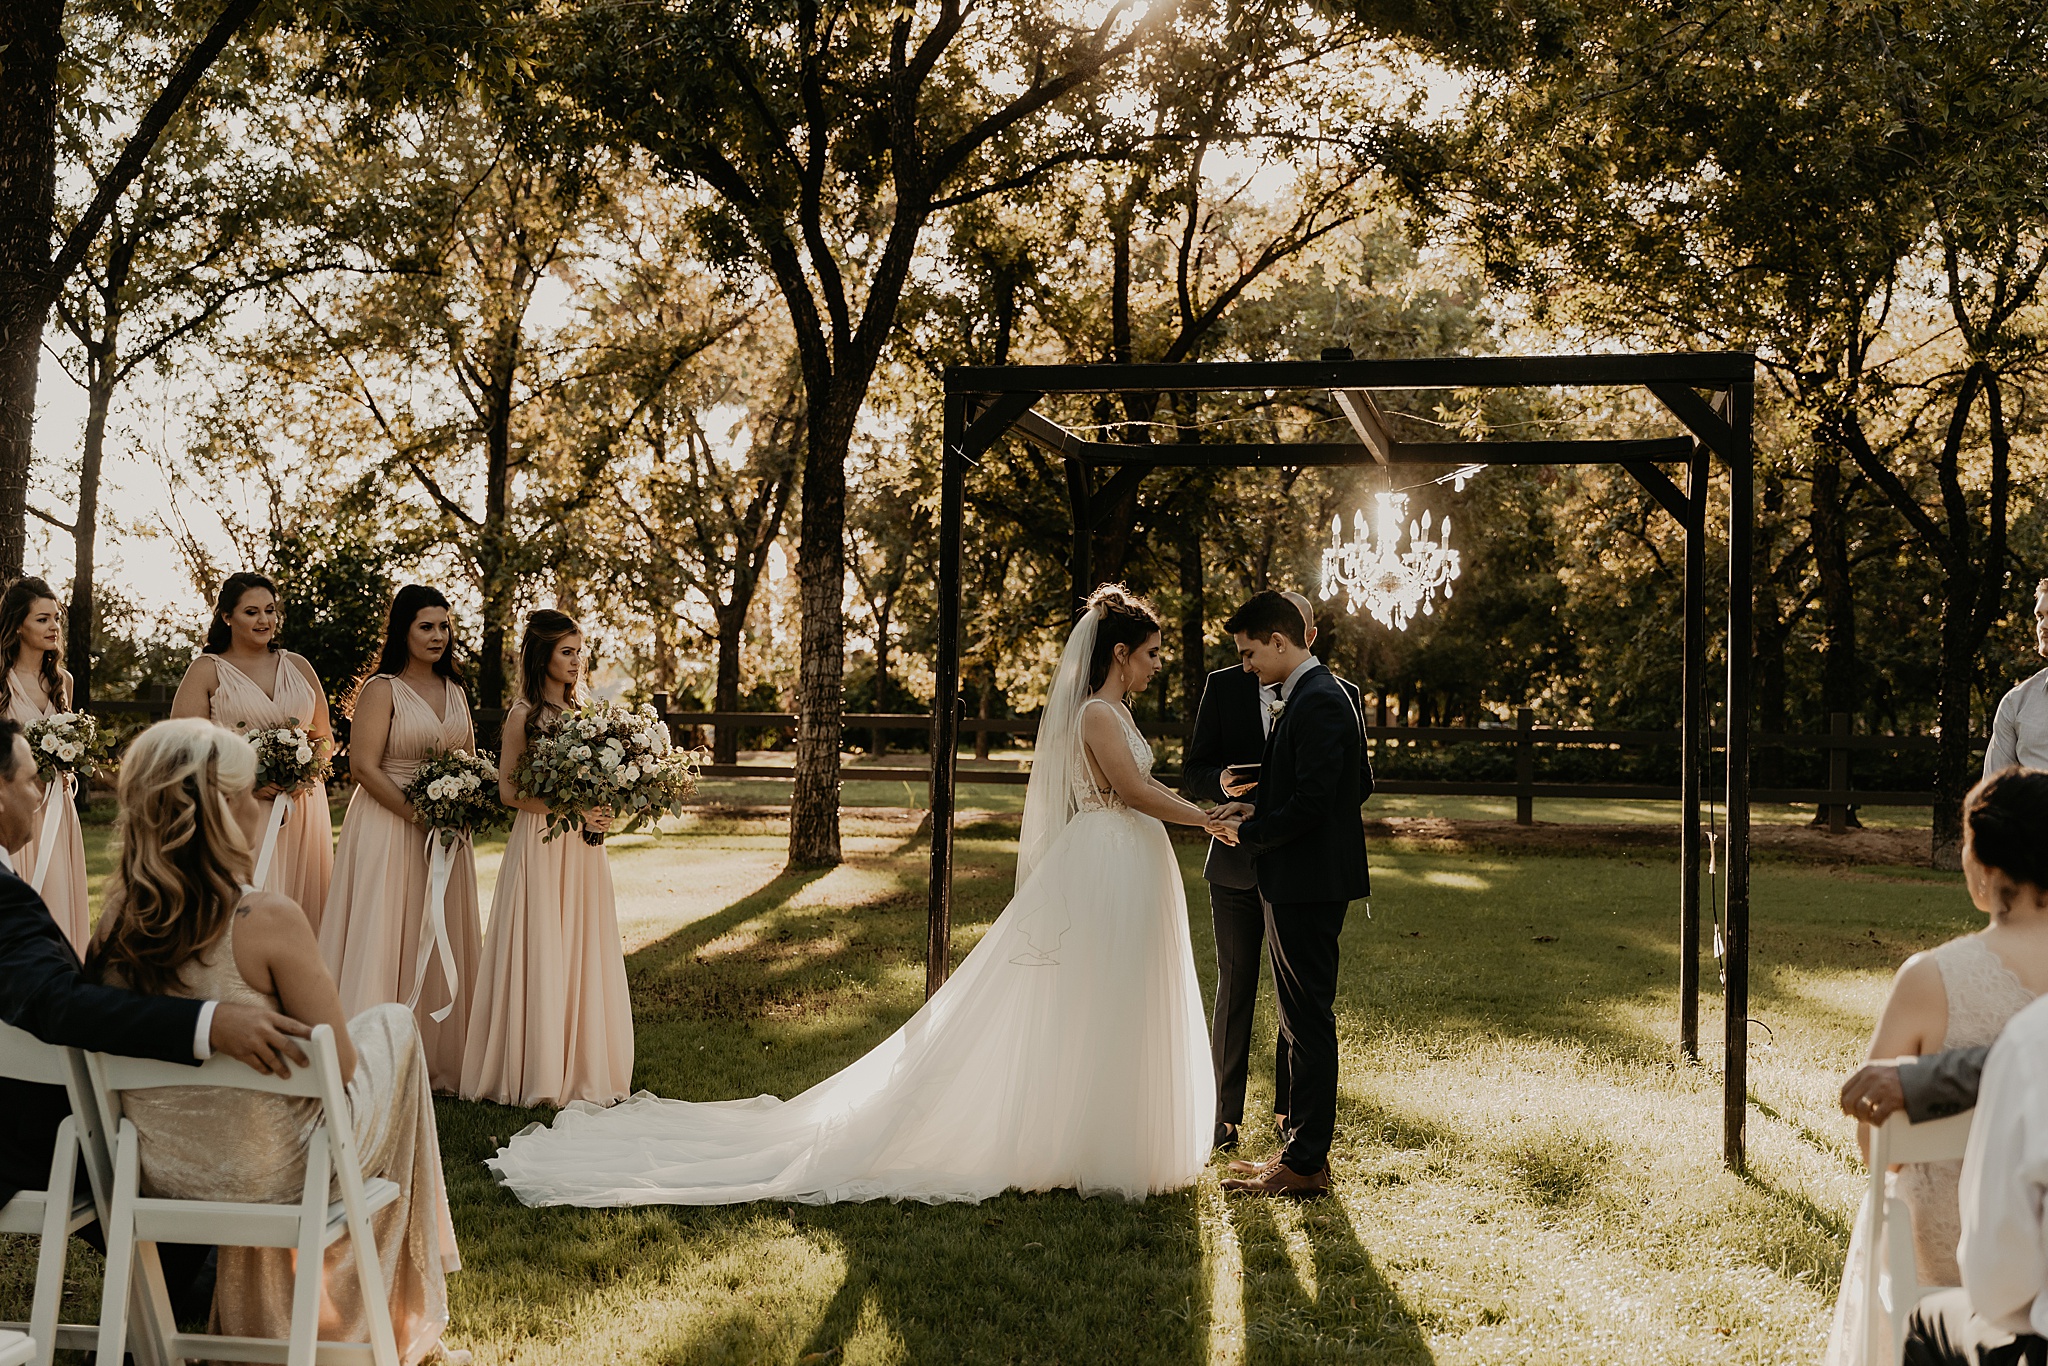 A wedding ceremony at Venue at the Grove in Arizona